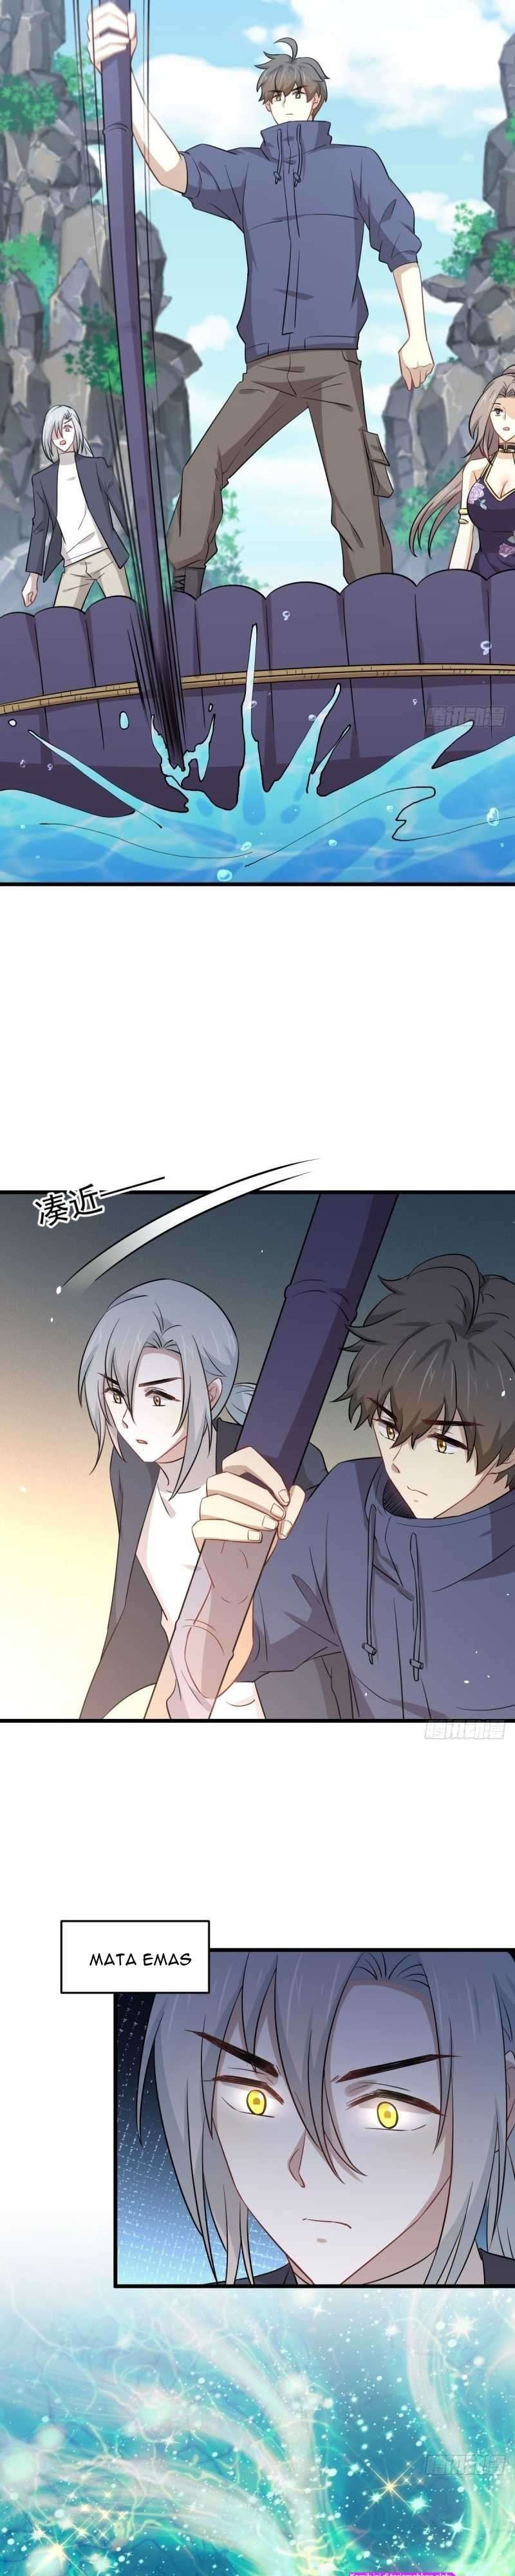 Immortal Swordsman in The Reverse World Chapter 194